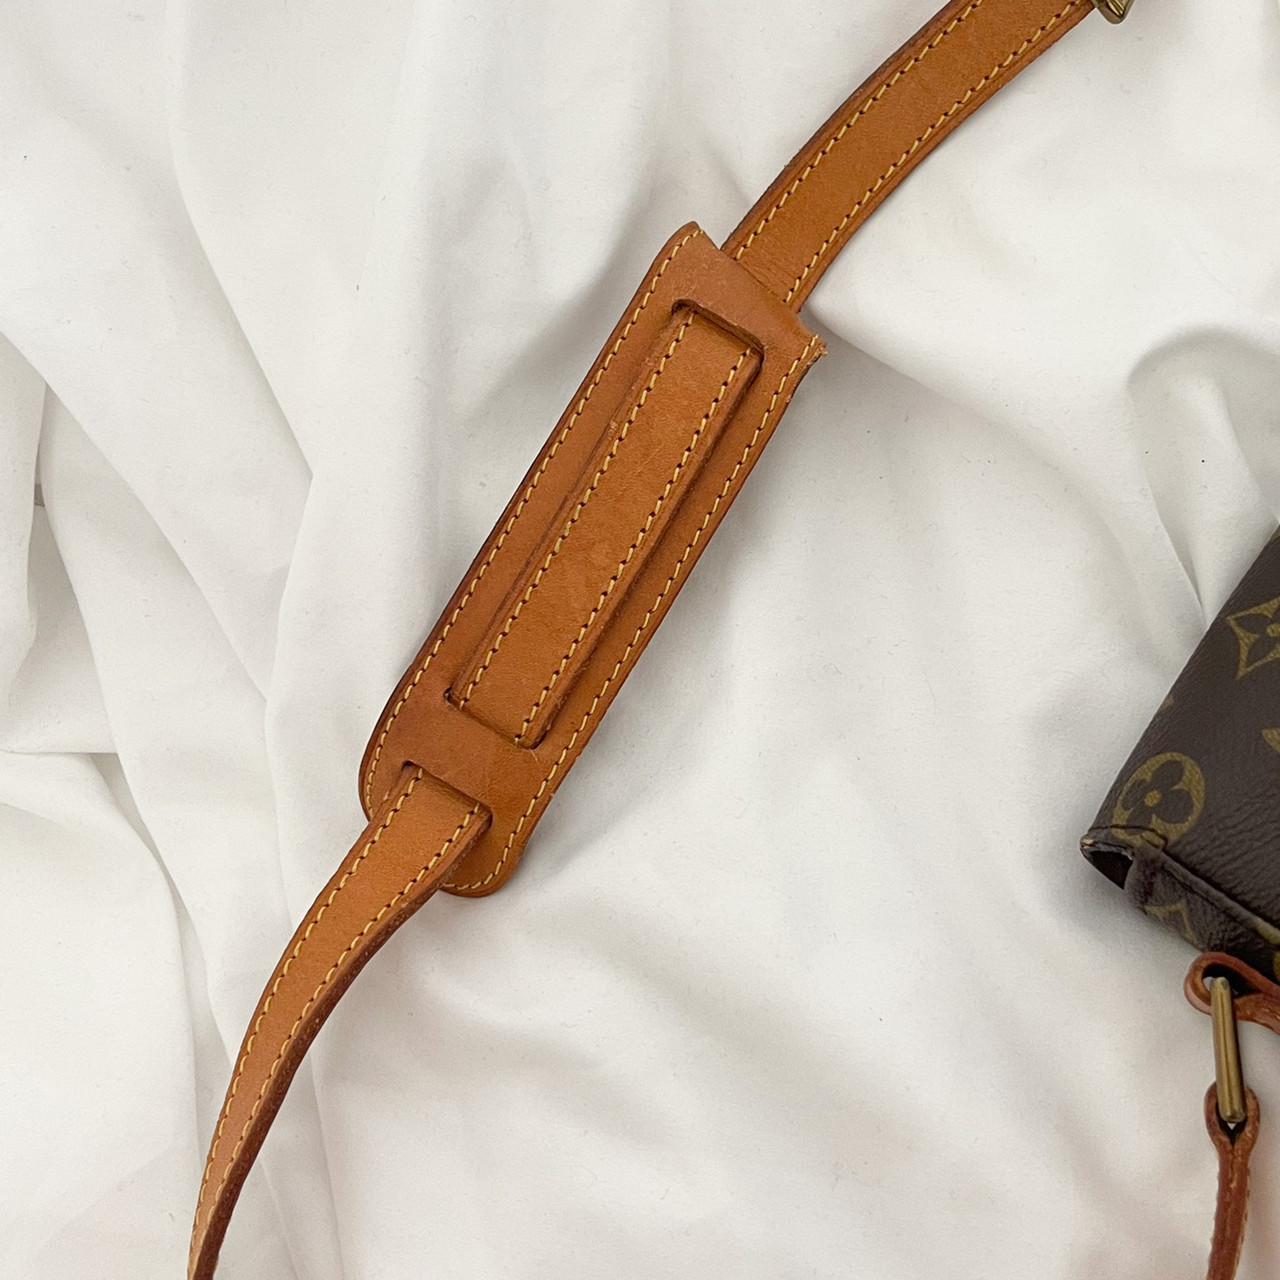 Chantilly Gm strap replacement cost?